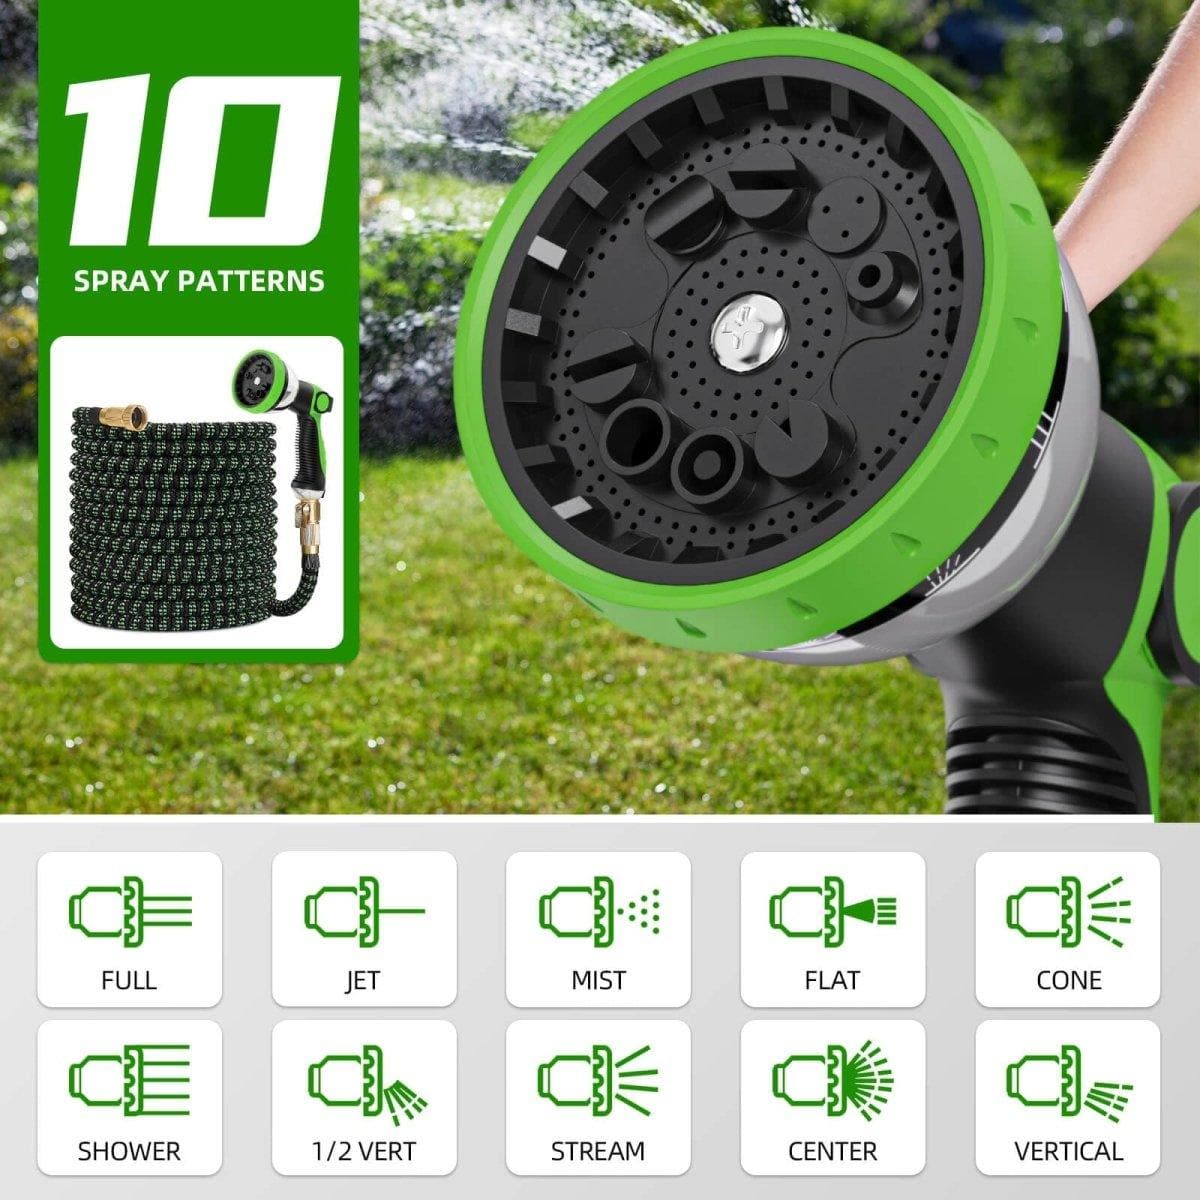 Huepar Flexible 100ft Garden Hose with 4-Layer Latex, 10 Function Spray Nozzle, and Solid Brass Fittings for Efficient Irrigation2